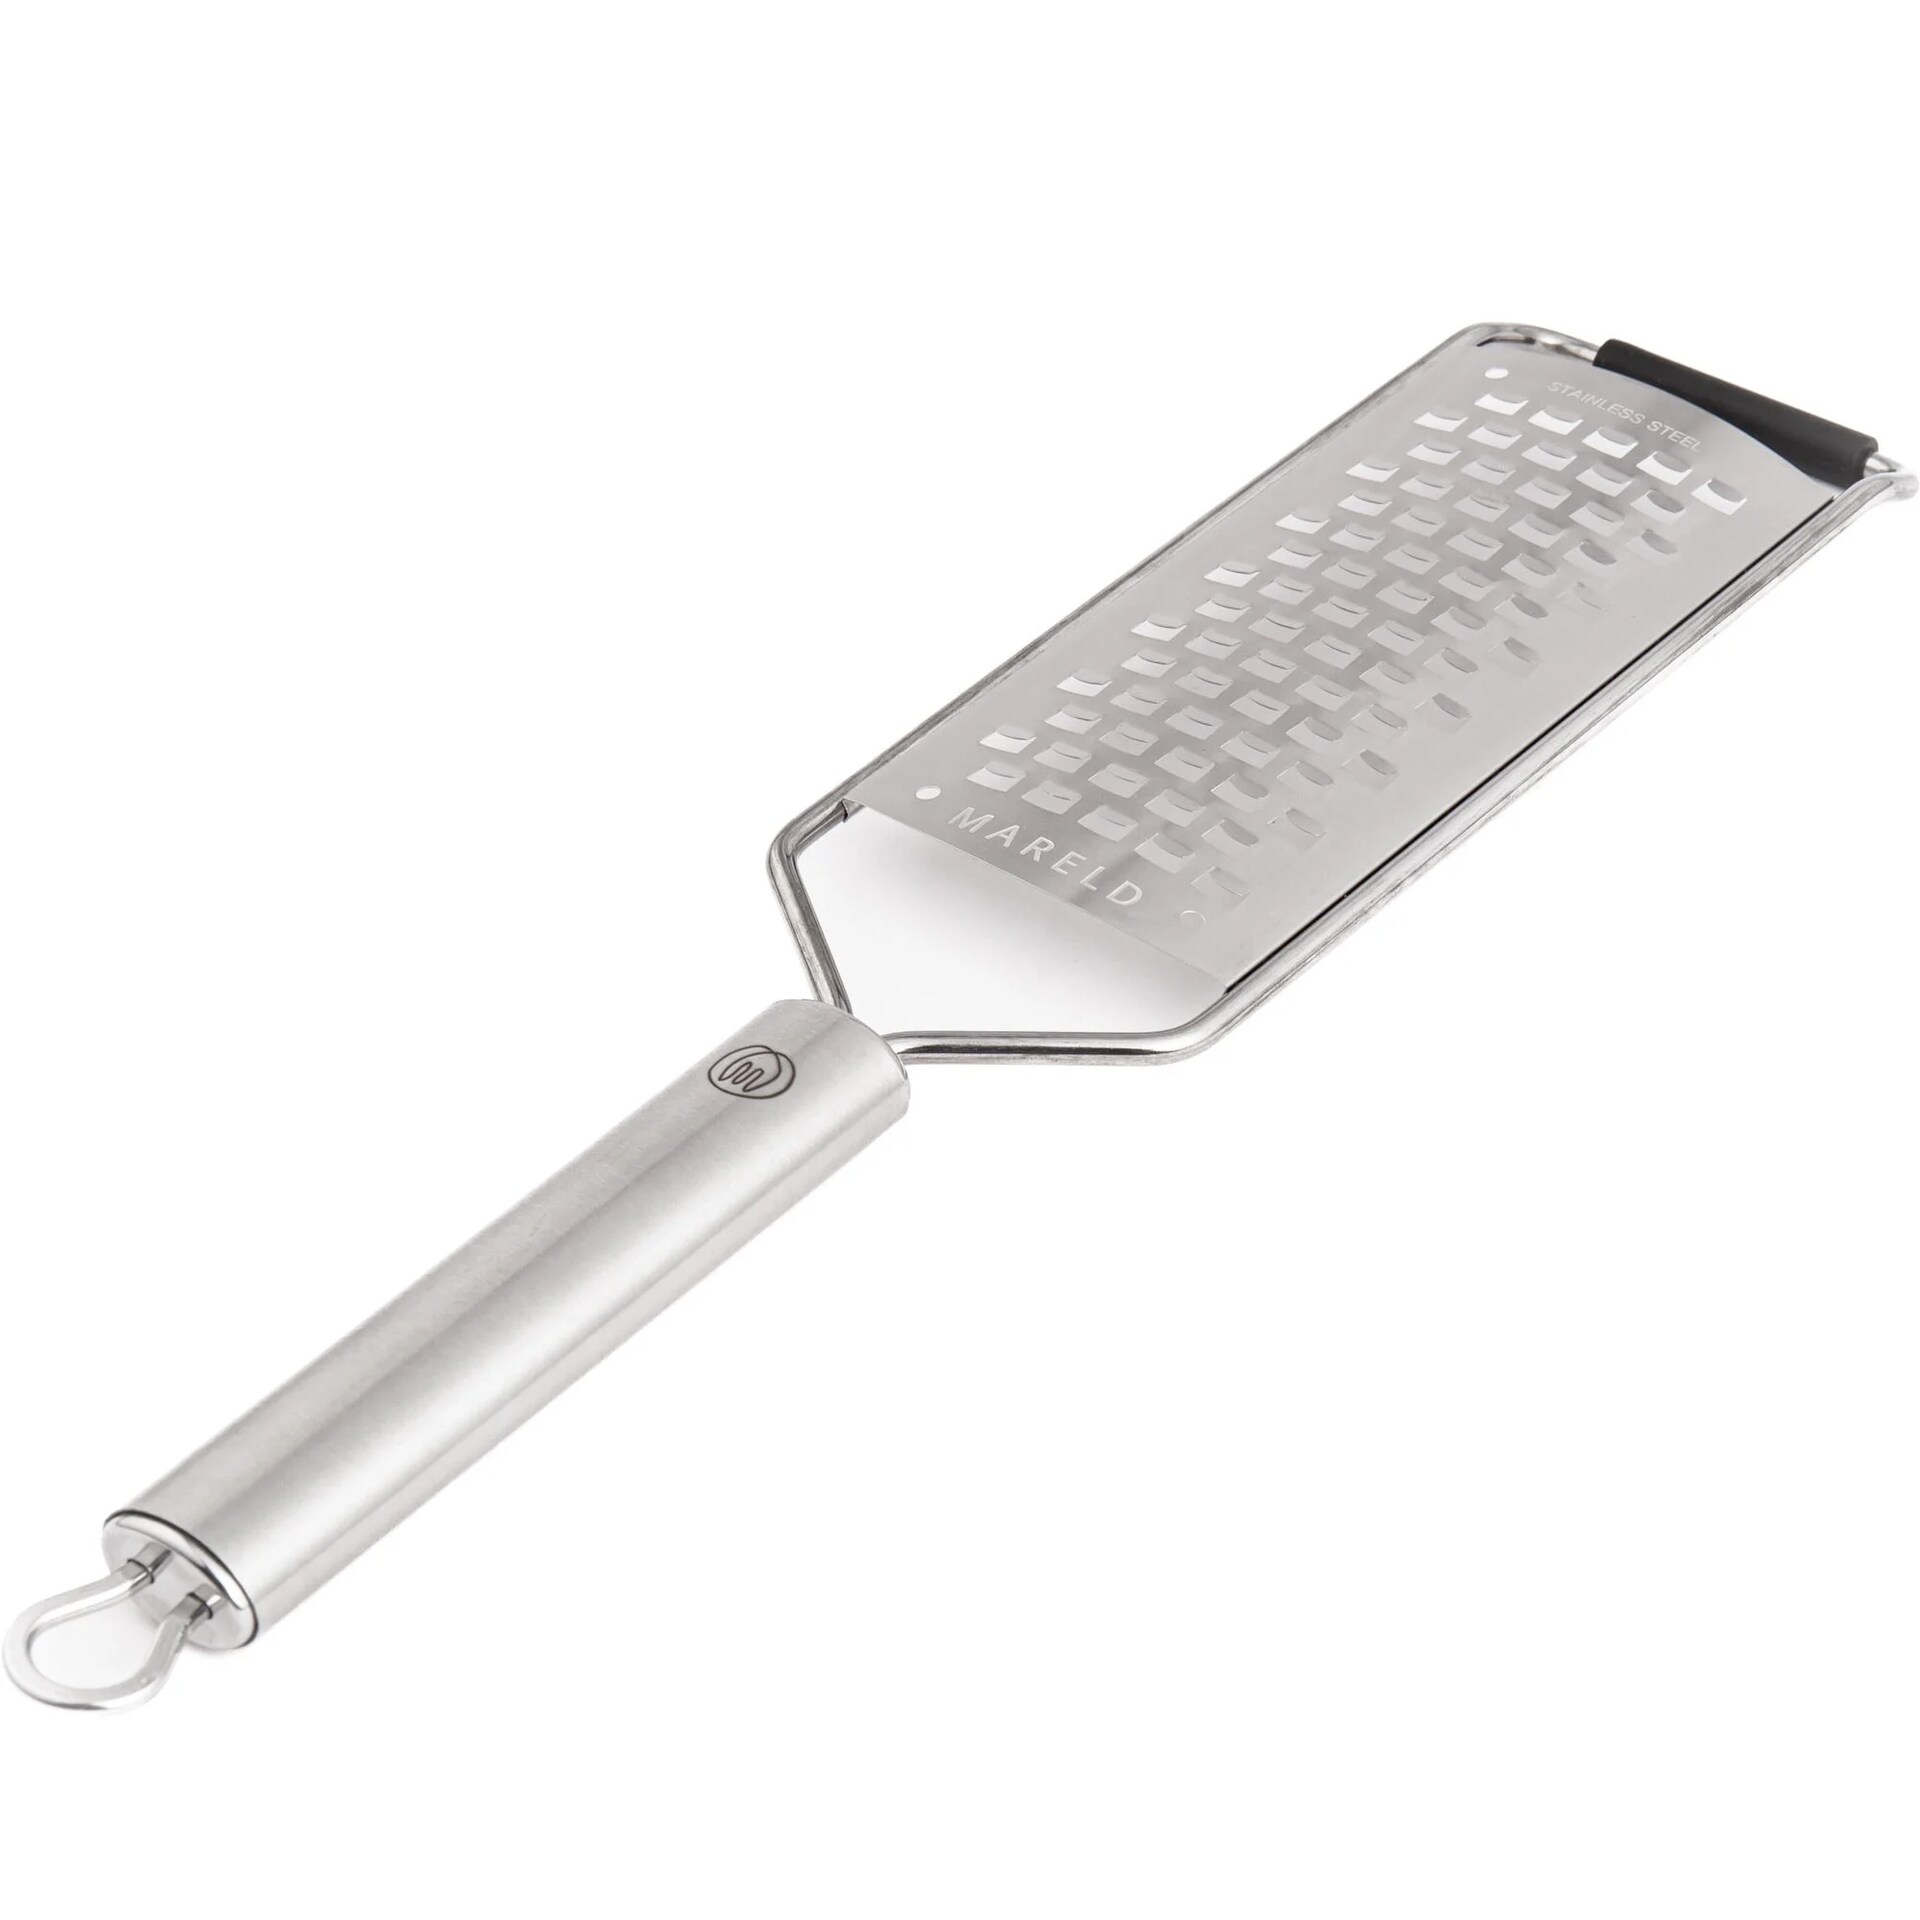 Mareld Grater Coarse - Mandolines & Graters Stainless Steel - 7-0067